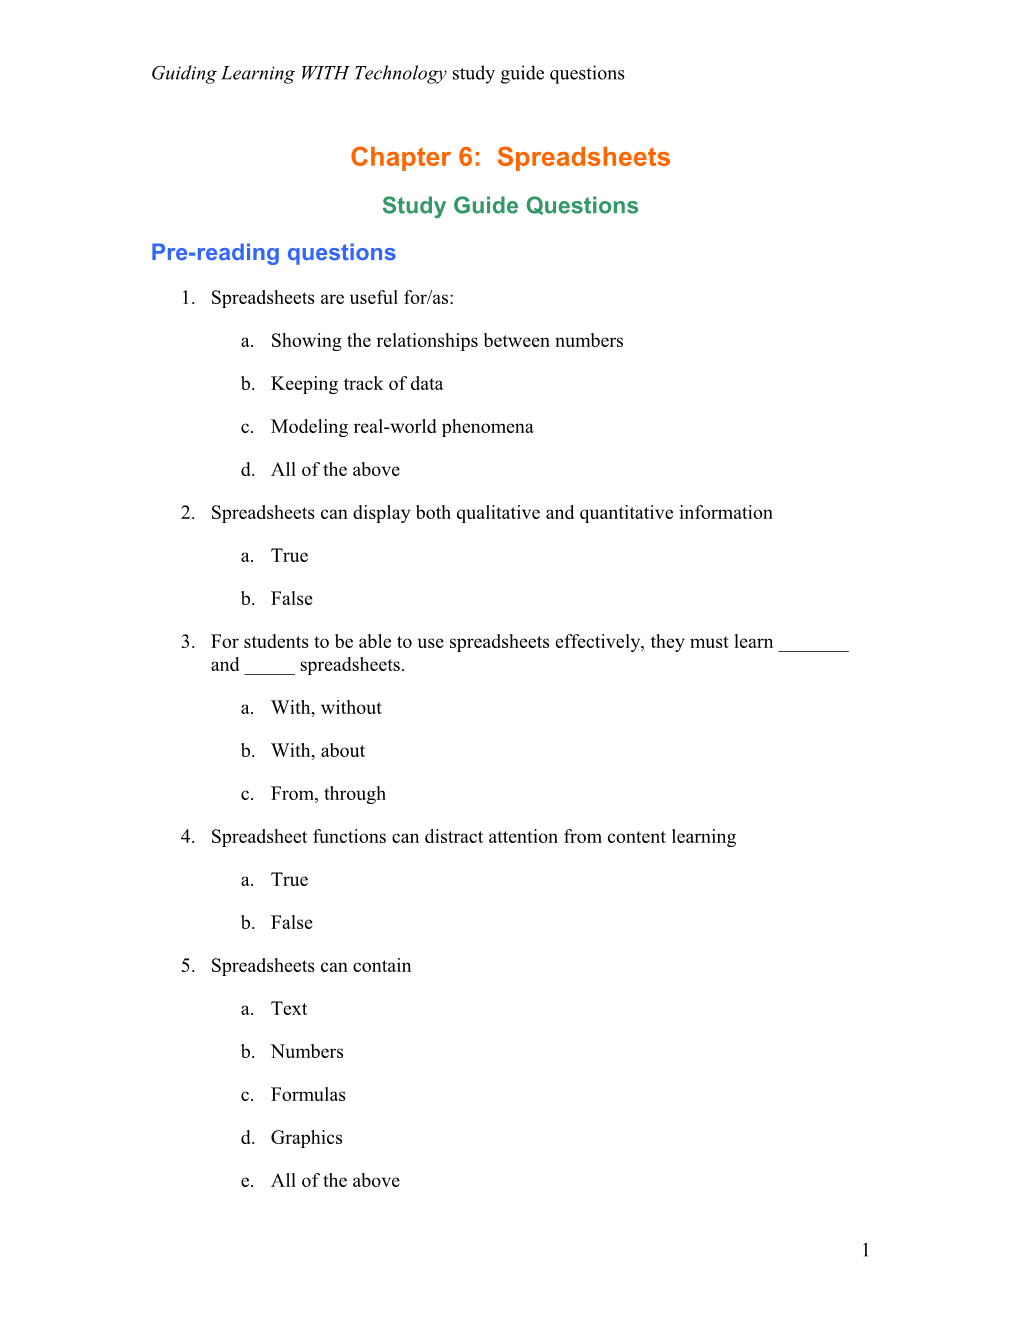 Guiding Learning with Technology Study Guide Questions